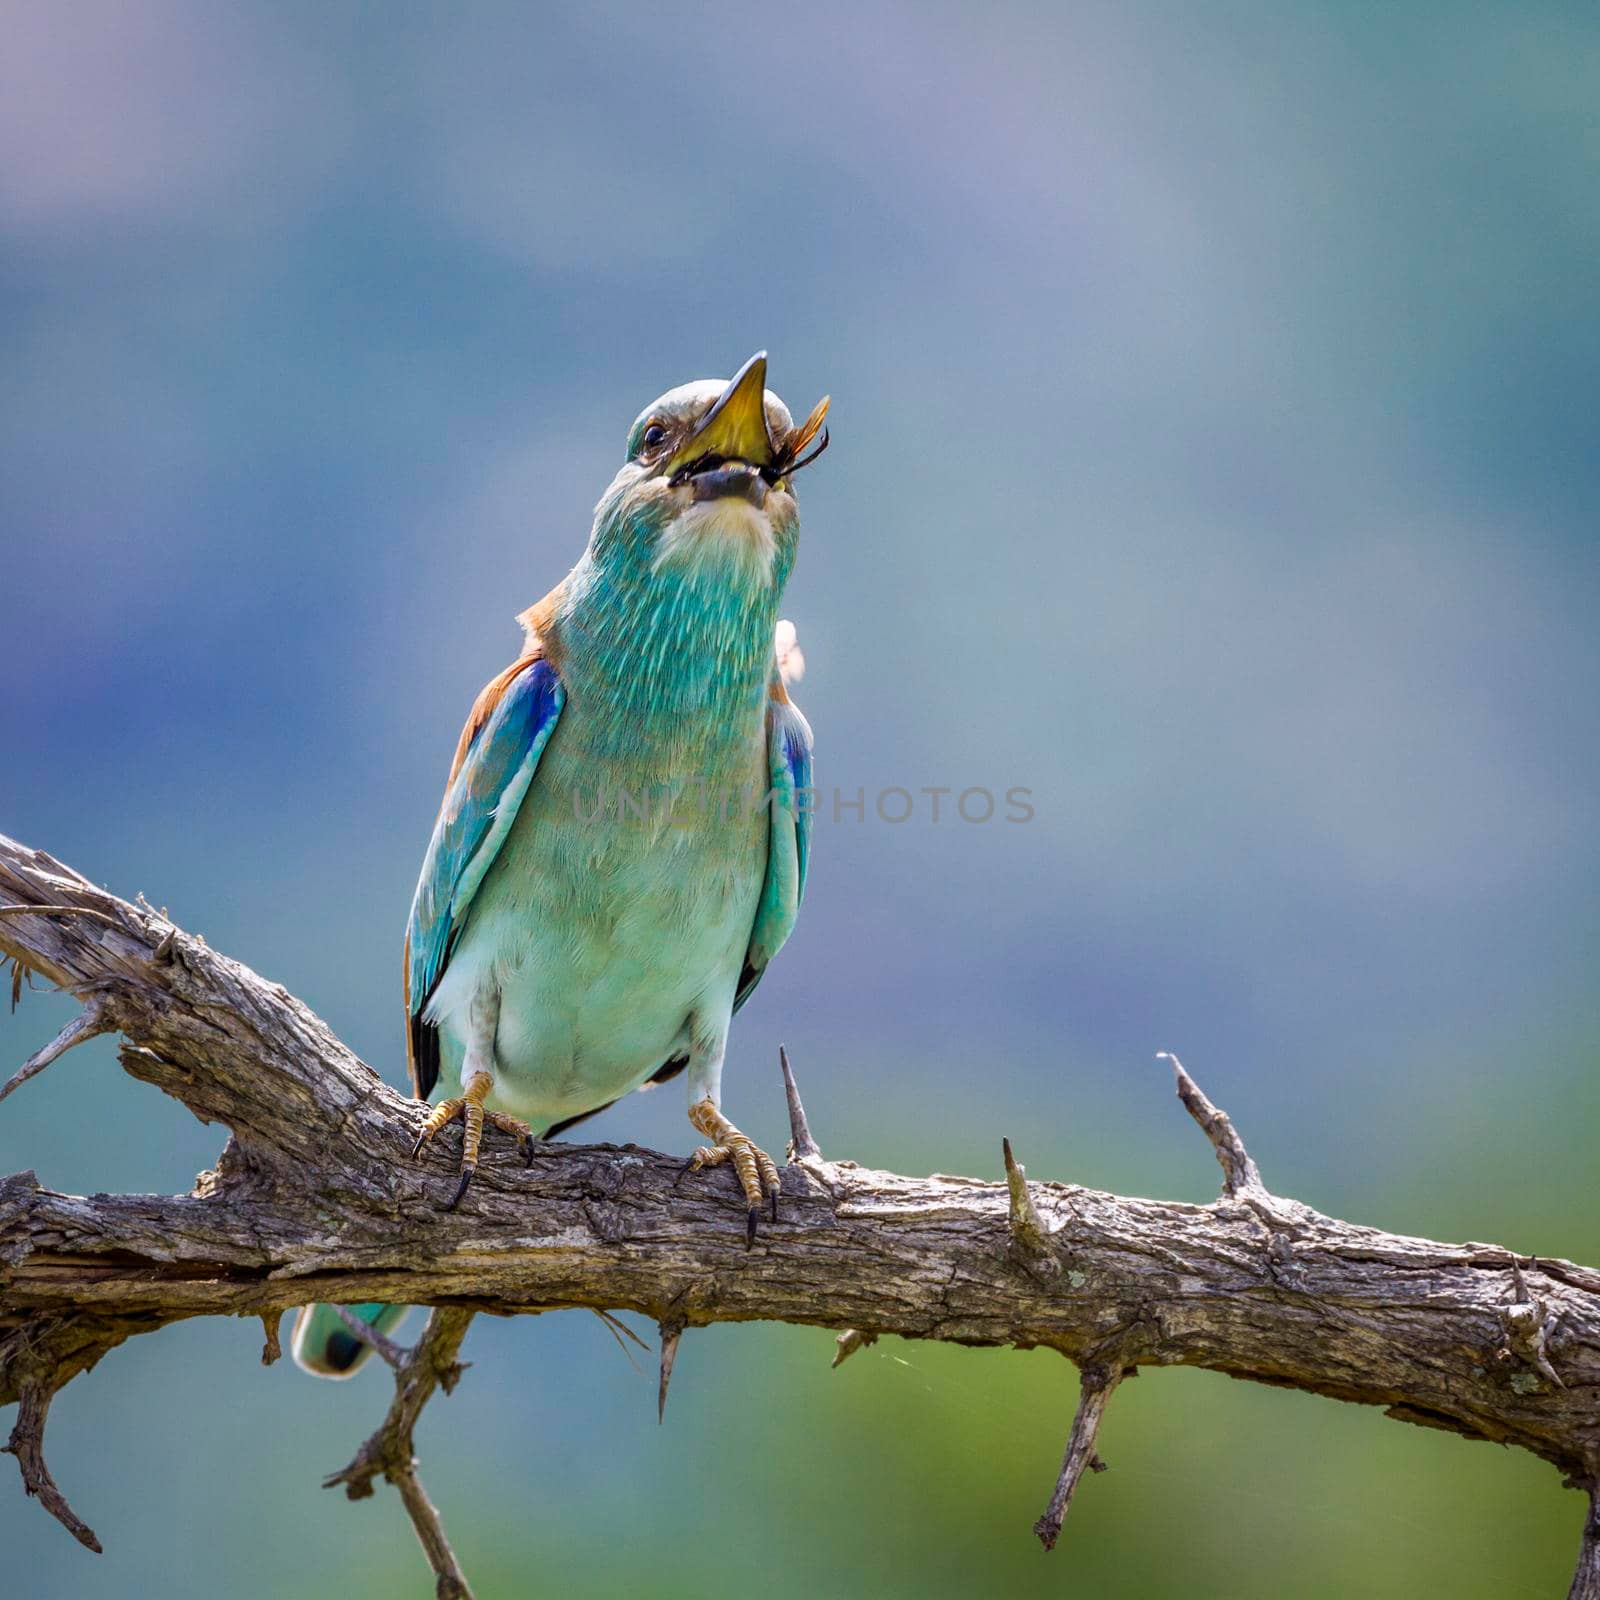 European Roller swallowing insect in Kruger National park, South Africa ; Specie Coracias garrulus family of Coraciidae